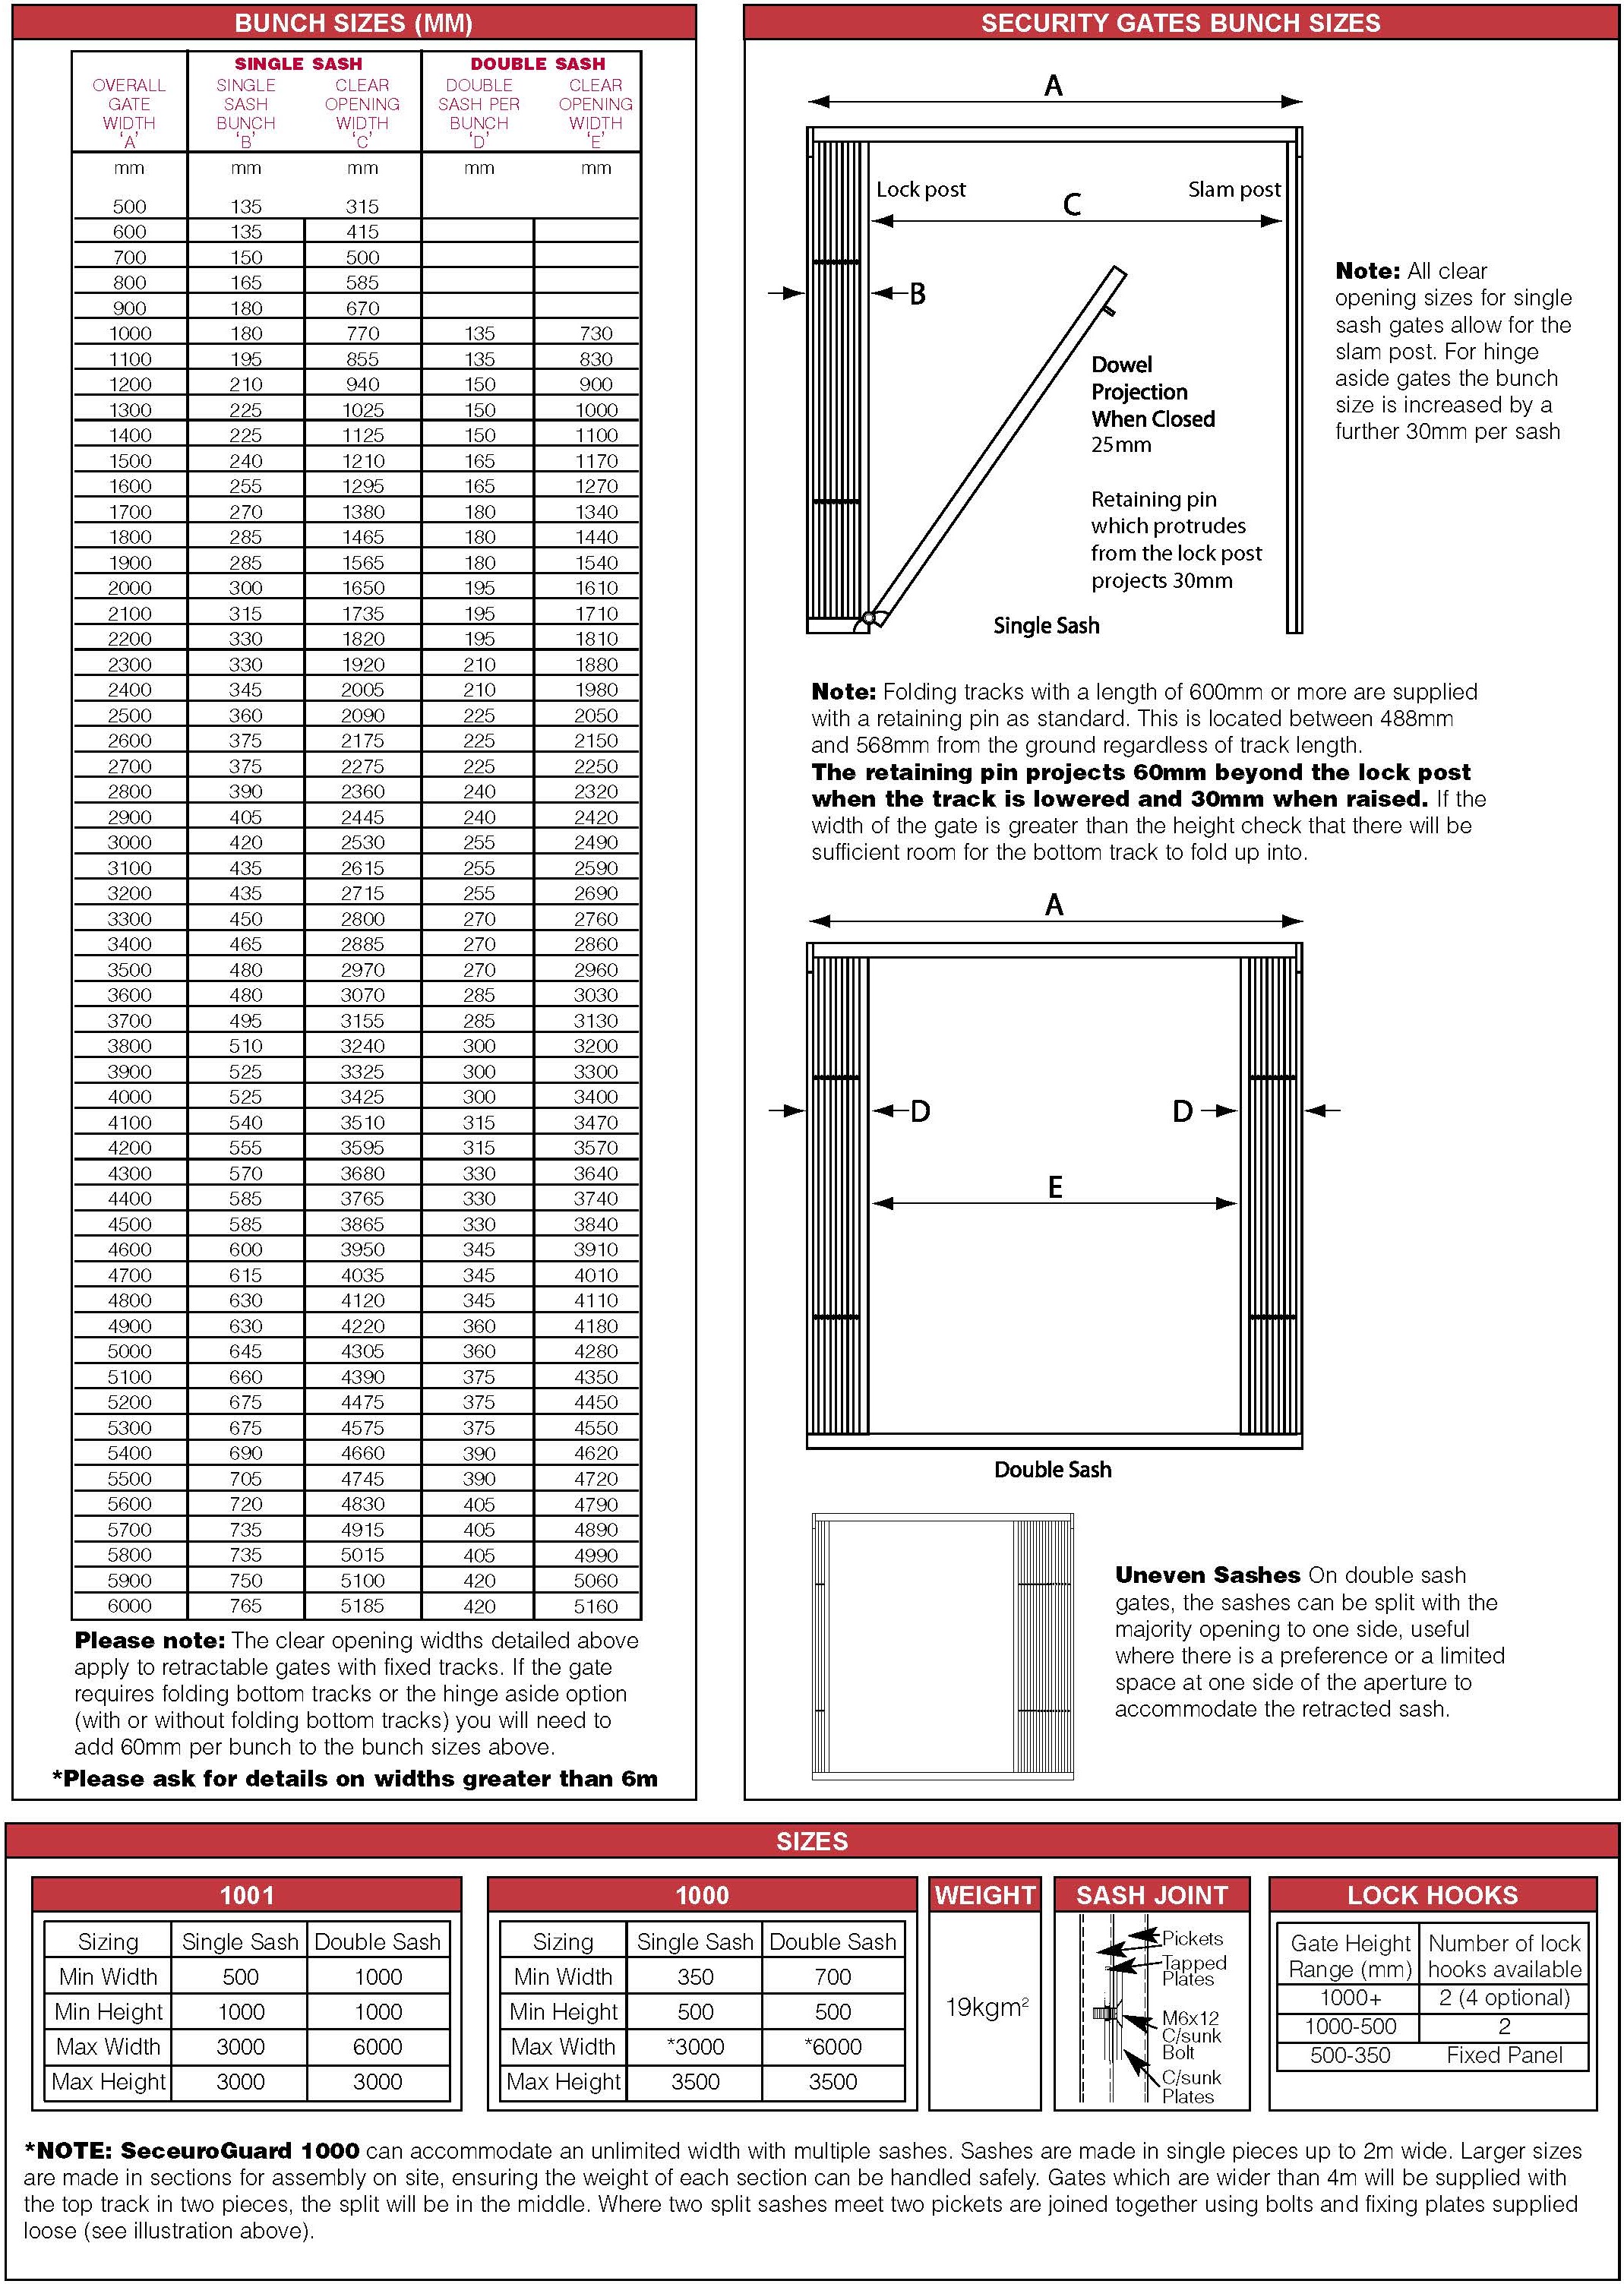 Dimensions for measuring a Security grille